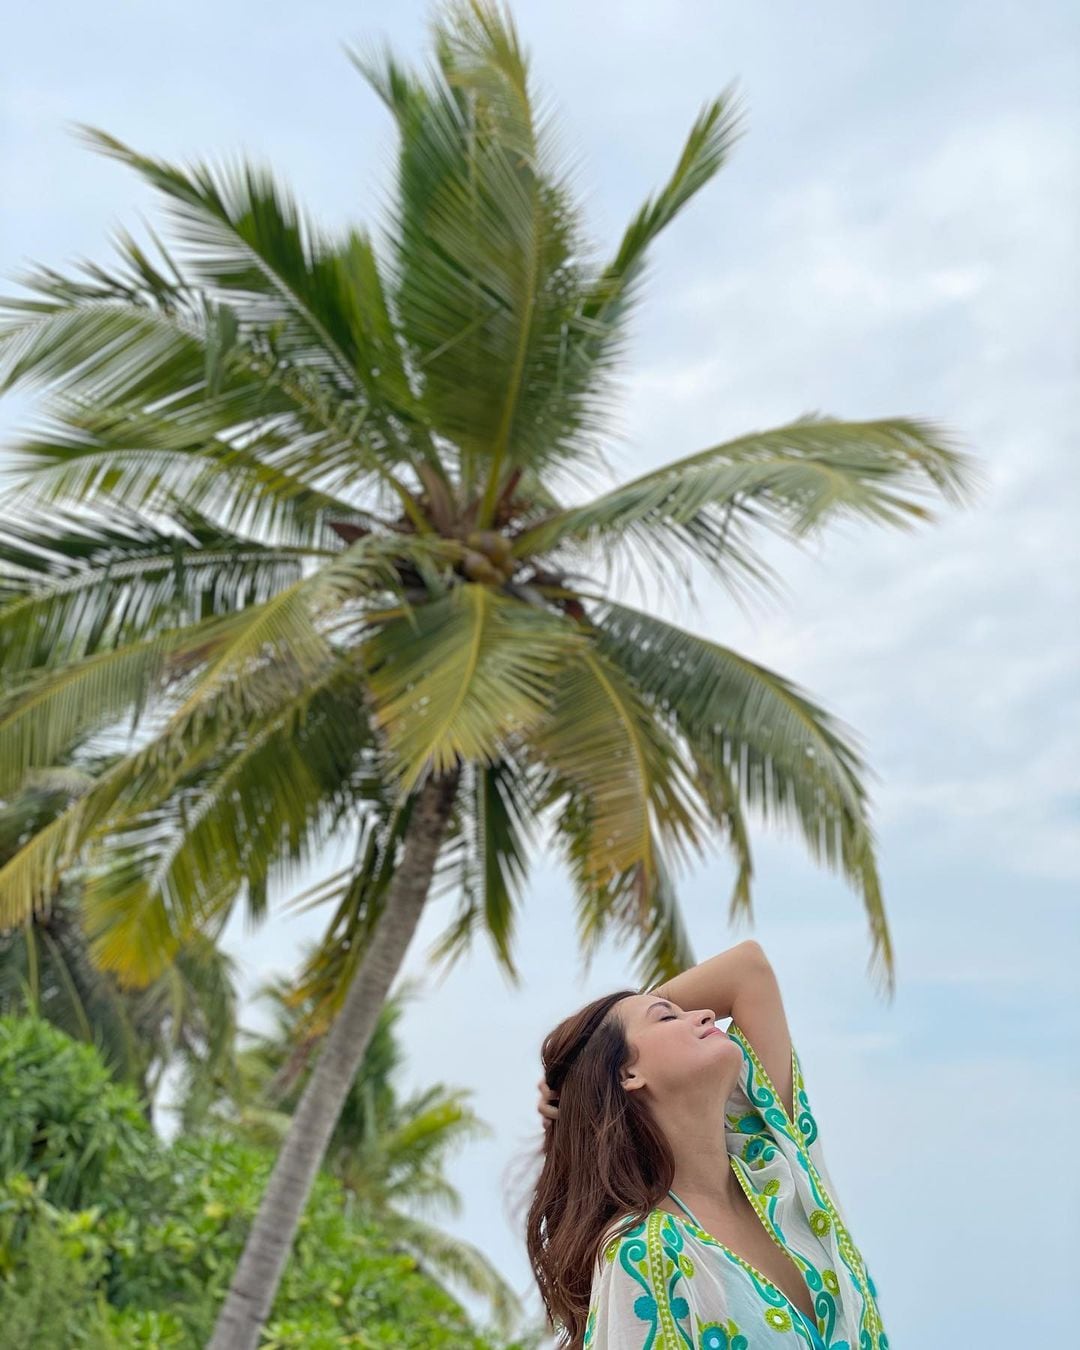  Dia Mirza looks picture-perfect against the swaying coconut trees. (Image: Instagram)